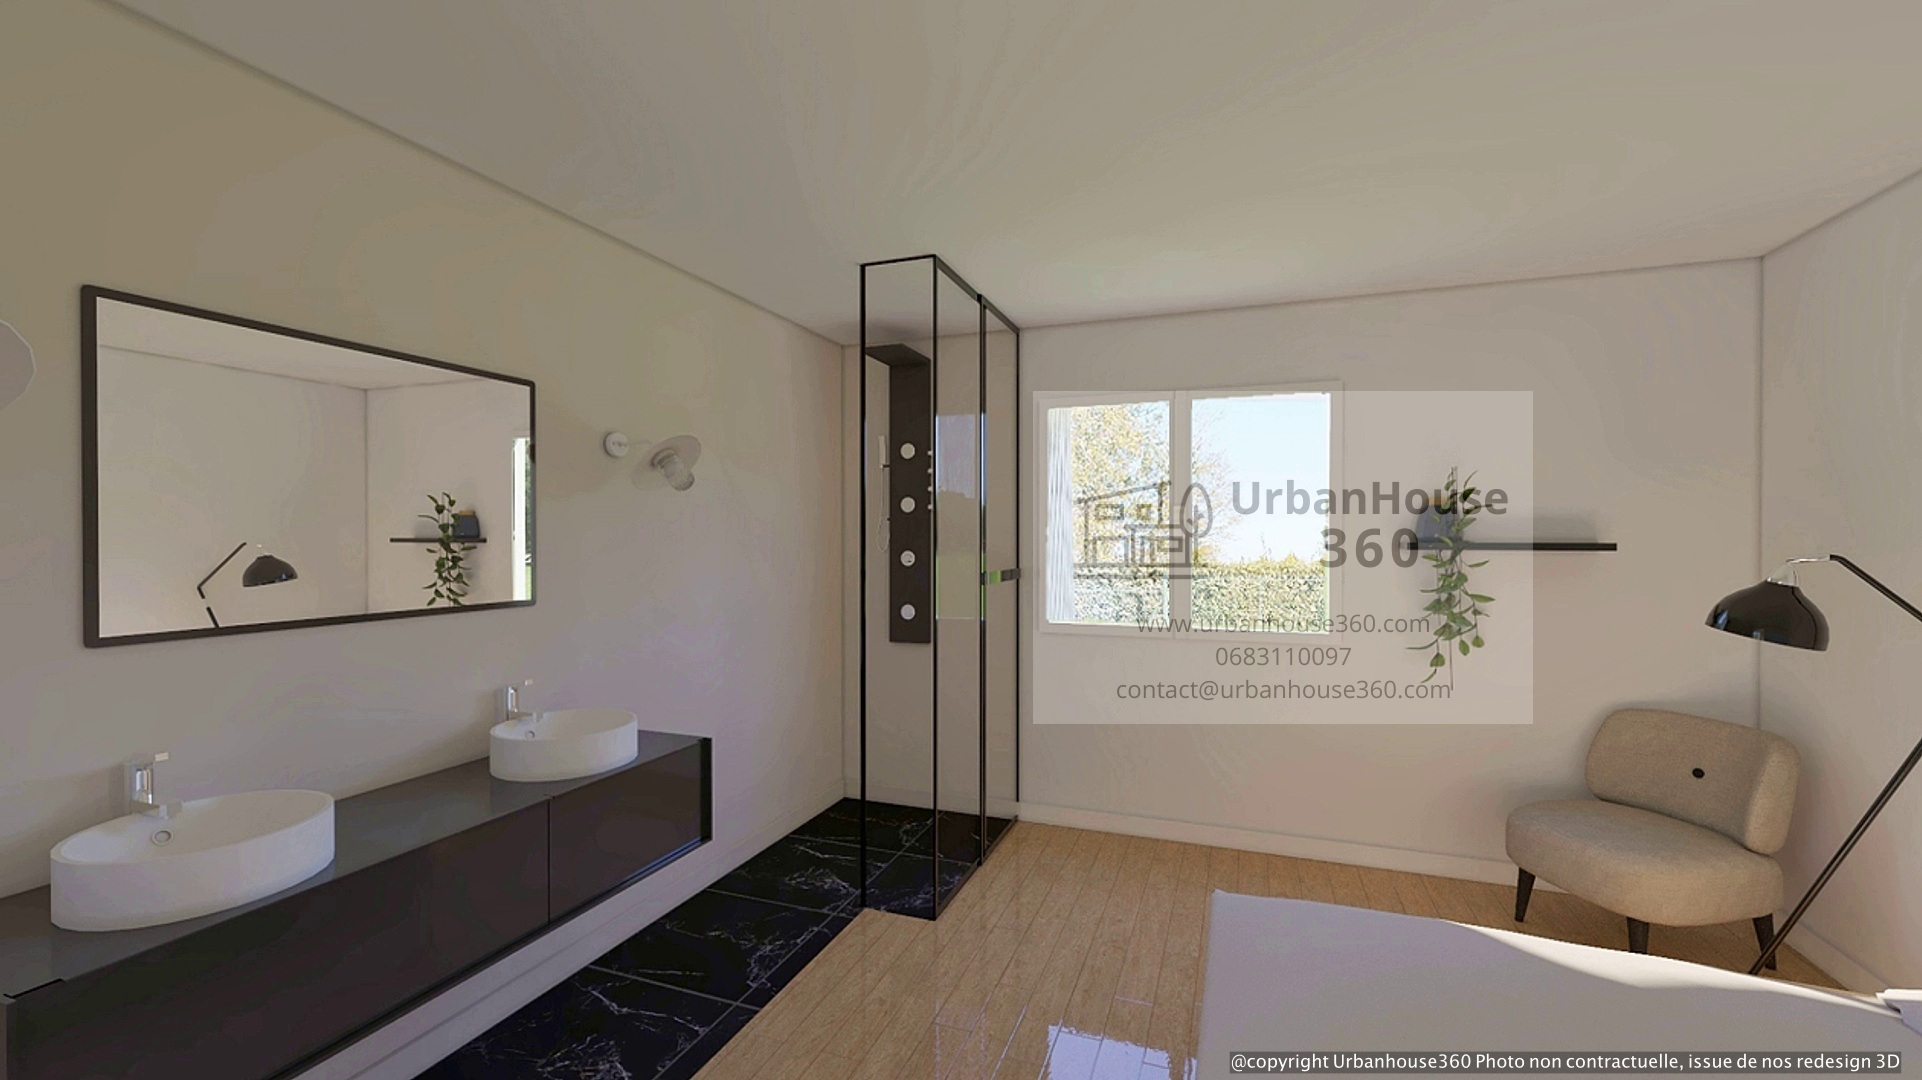 Urbanhouse360-Coulounieix-chamiers-Chambre_1